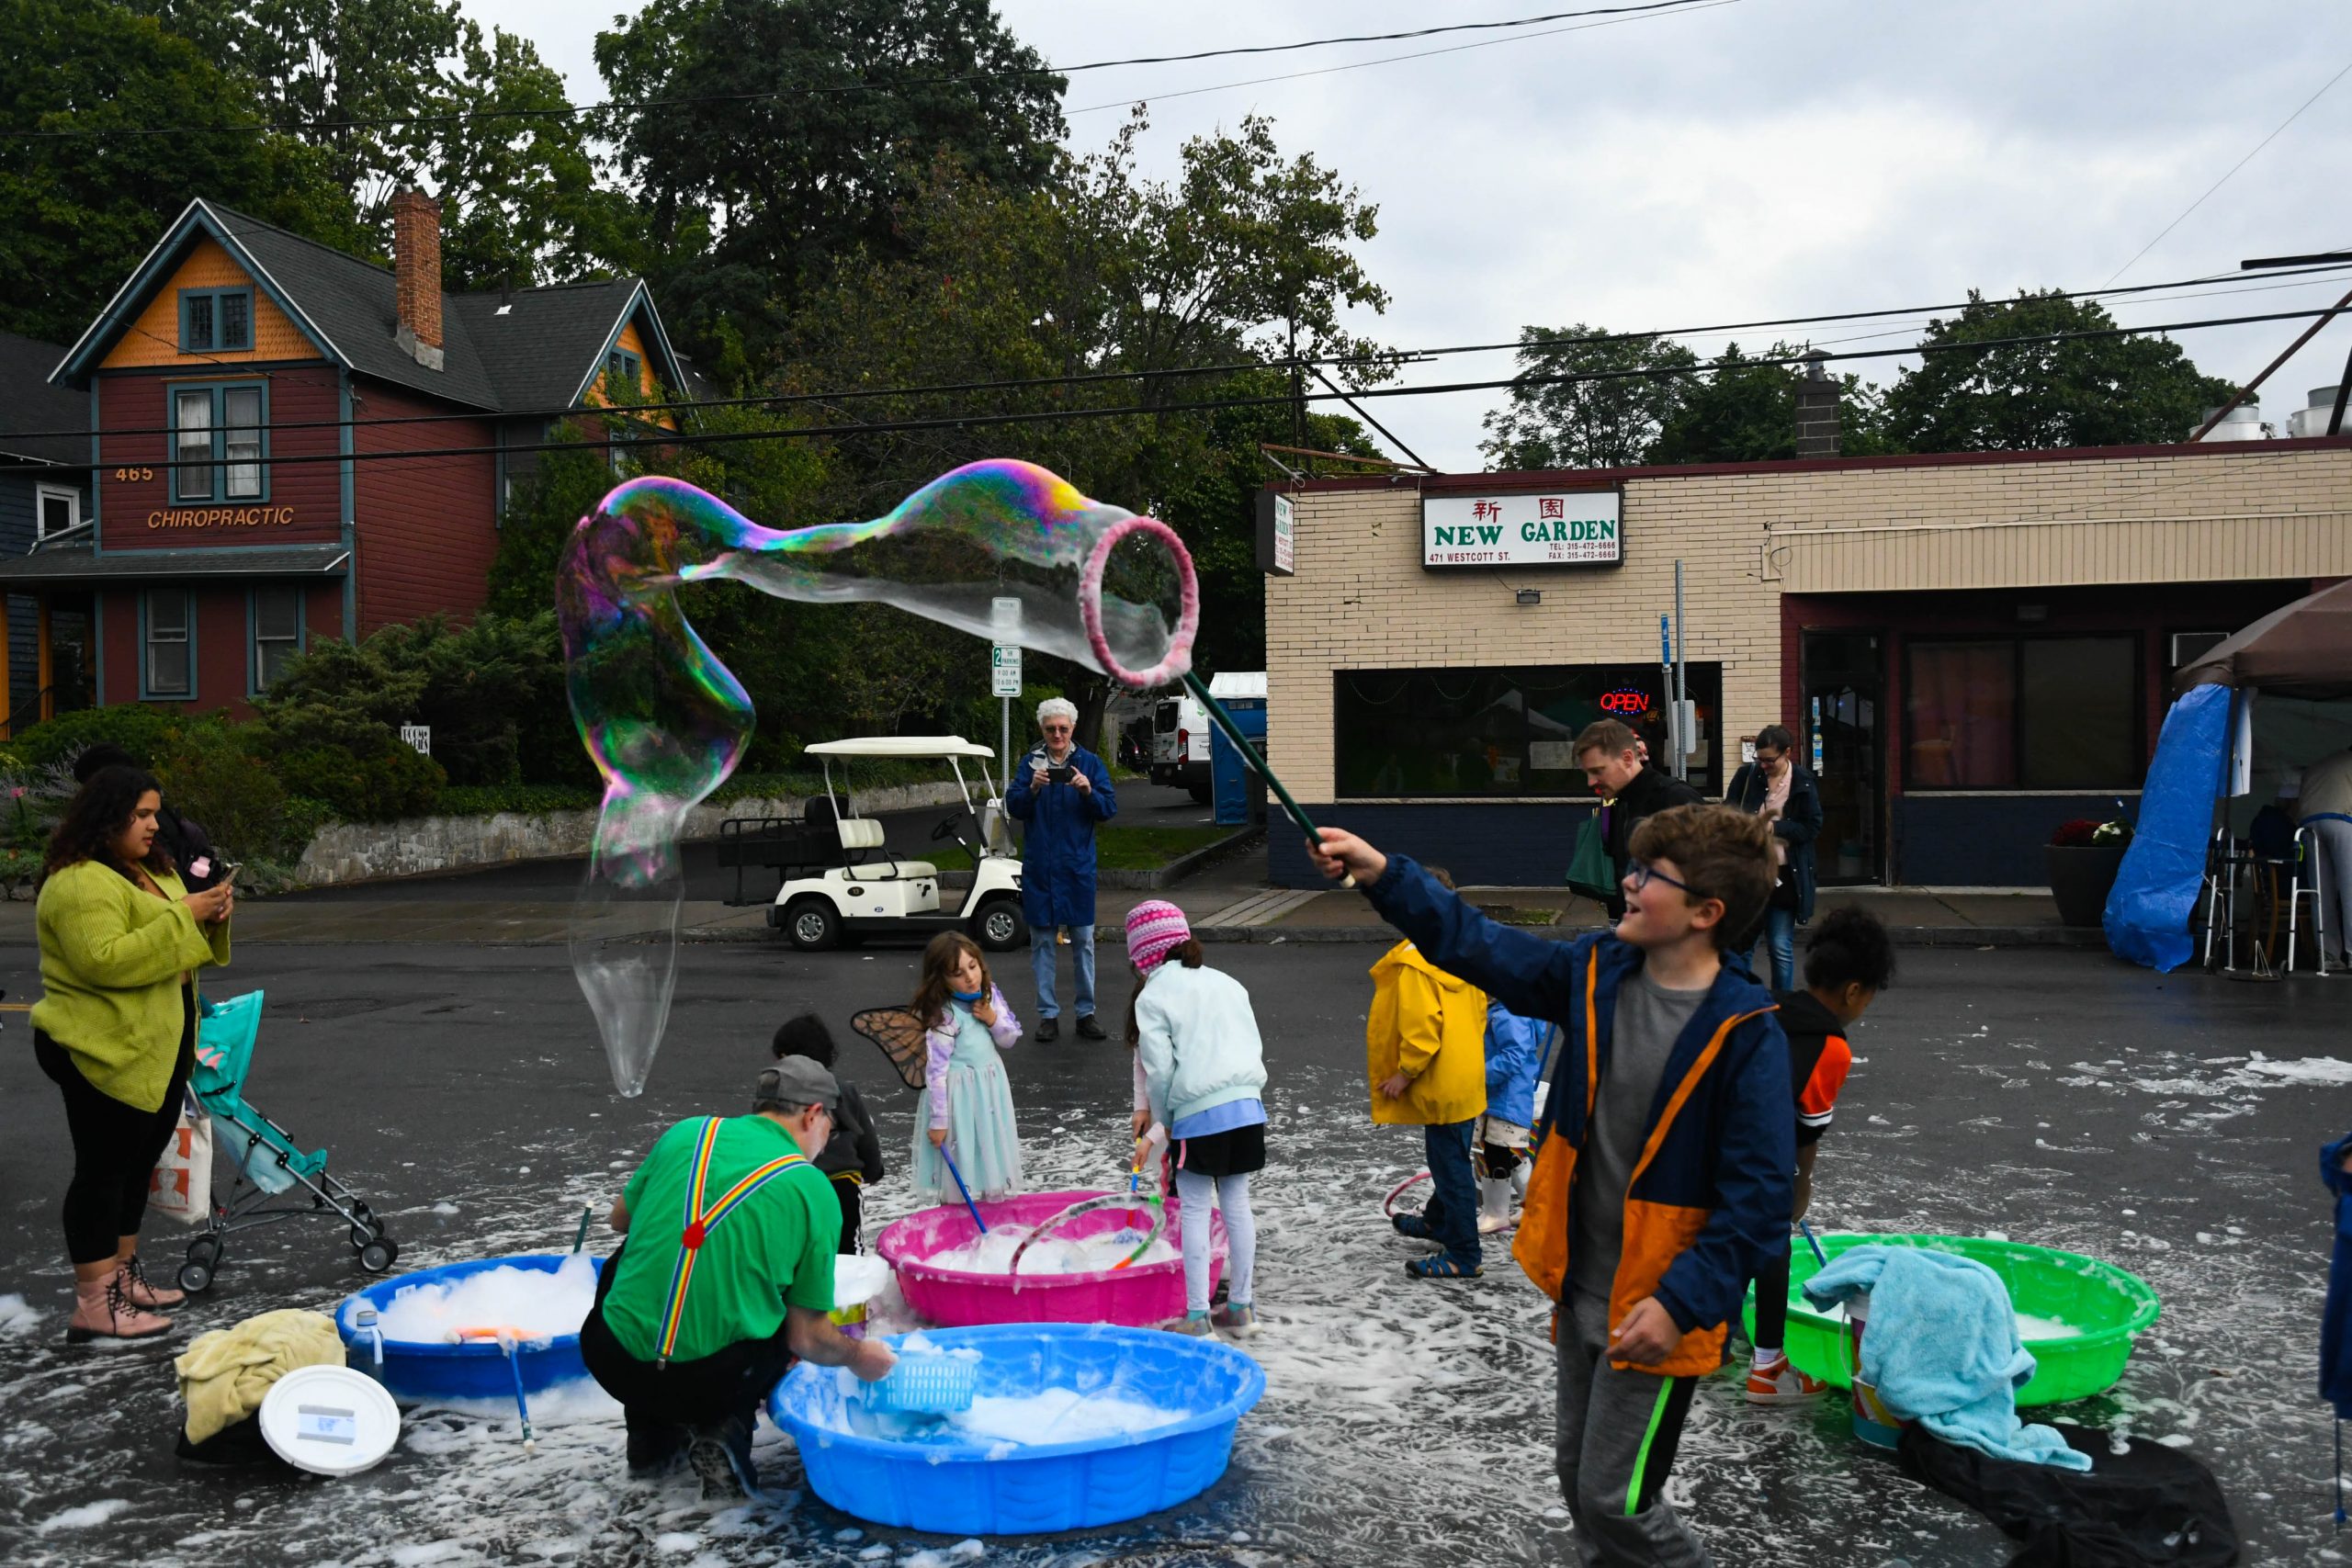 Children playing with bubbles at the Westcott Street Cultural Fair